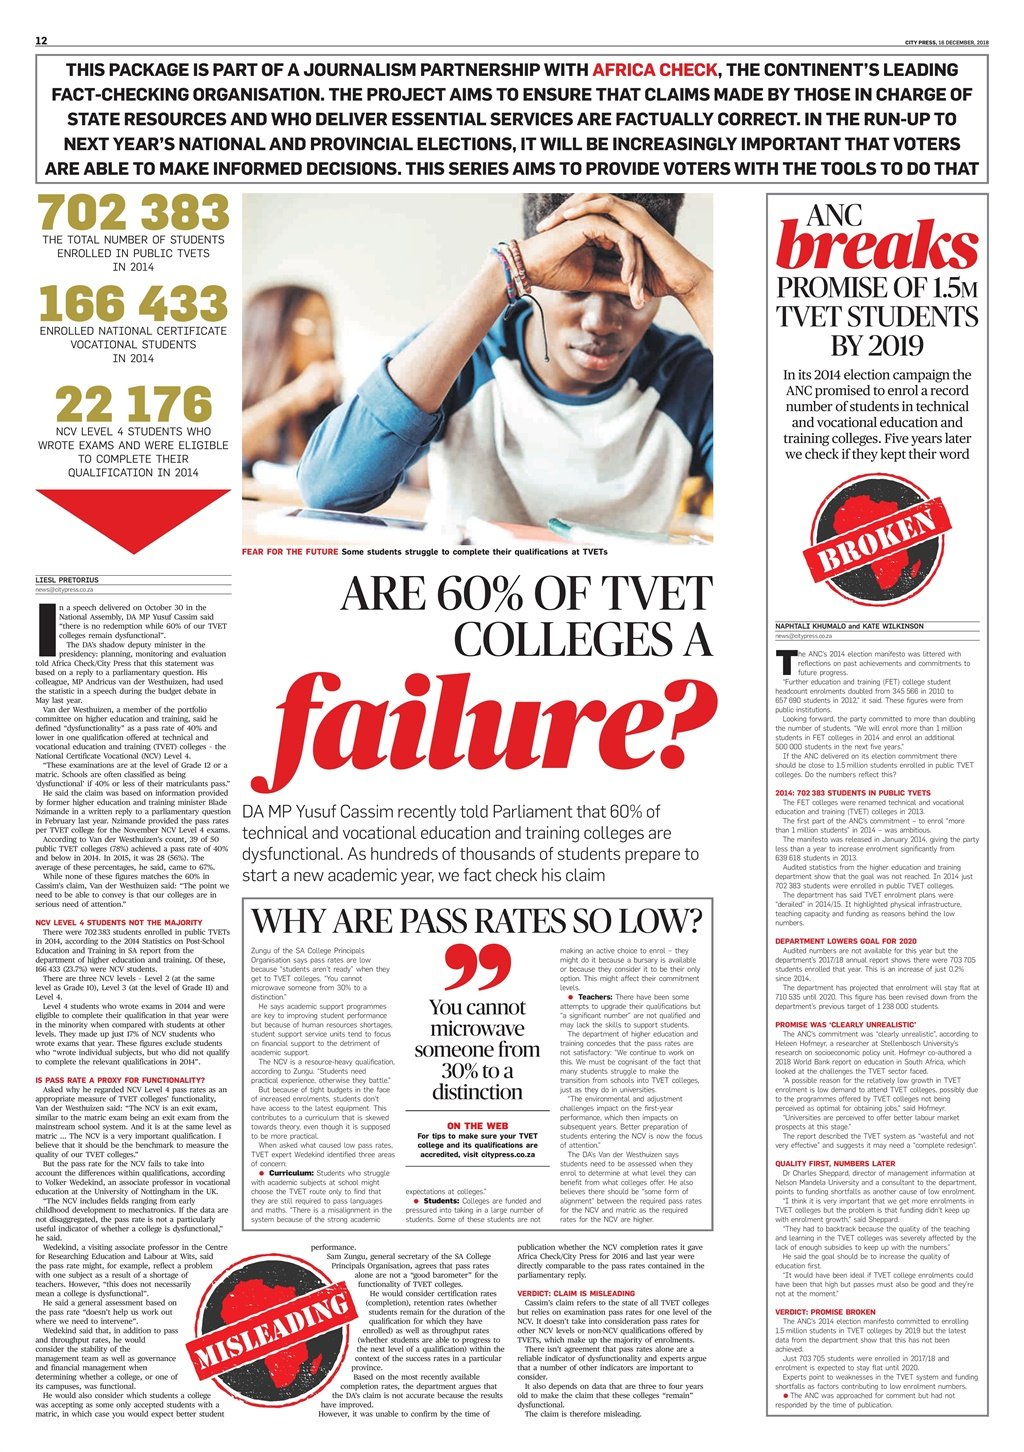 City Press published a special report on TVET colleges in collaboration with Africa Check.